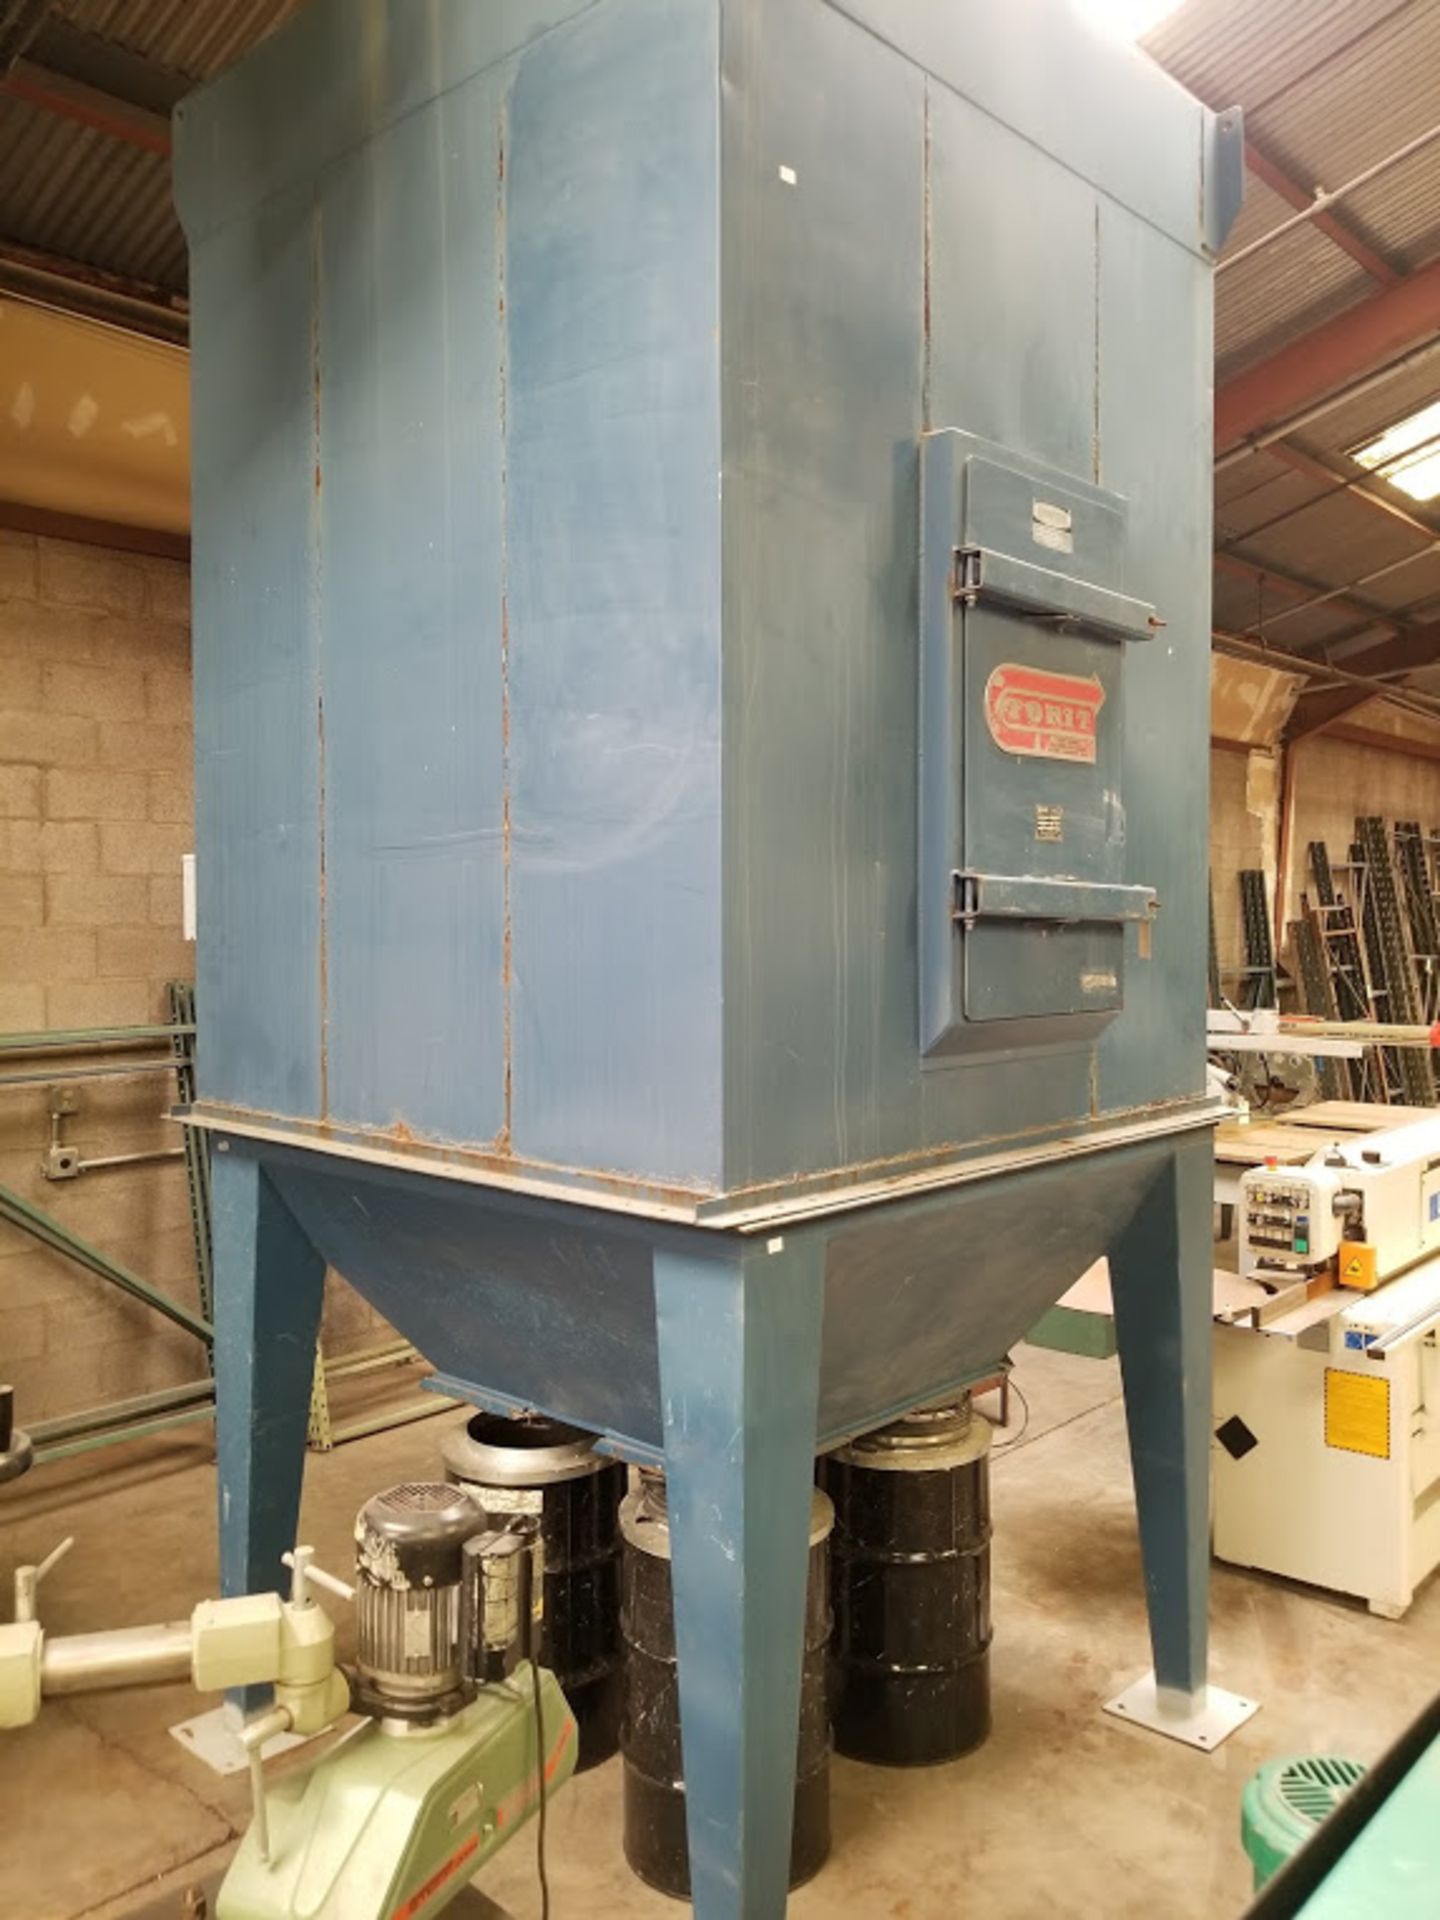 Torit Bag House Dust Collector, Model #MIC-770-455 230/460 Volts 15 HP 3 Phase W/4 Steel Drums - Image 6 of 11